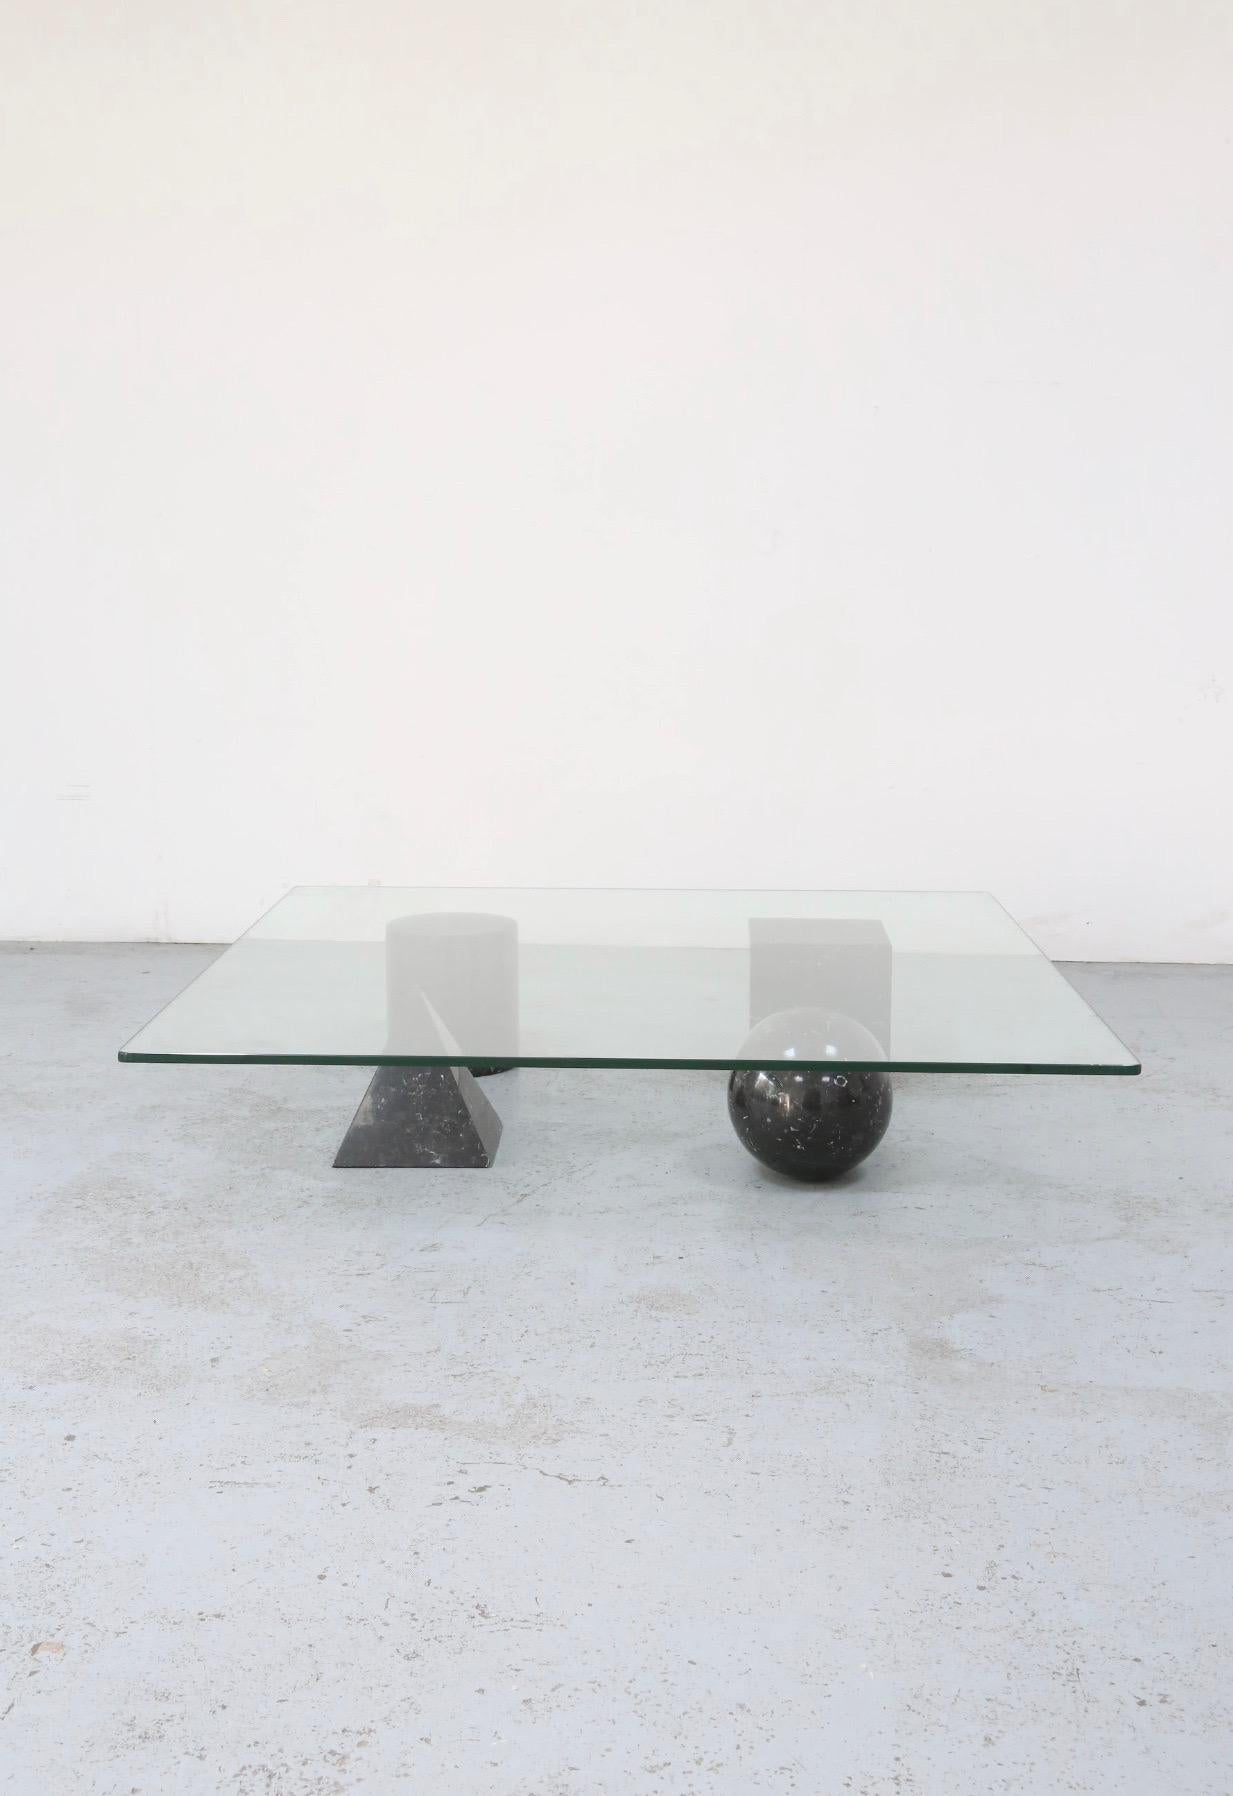 A Massimo Vignelli & Lella Vignell “Metafora” coffee table featuring four black marble geometric shapes and a square 1/2” thick glass top. Each of the geometric shapes can be assembled into different configurations at will. The table was